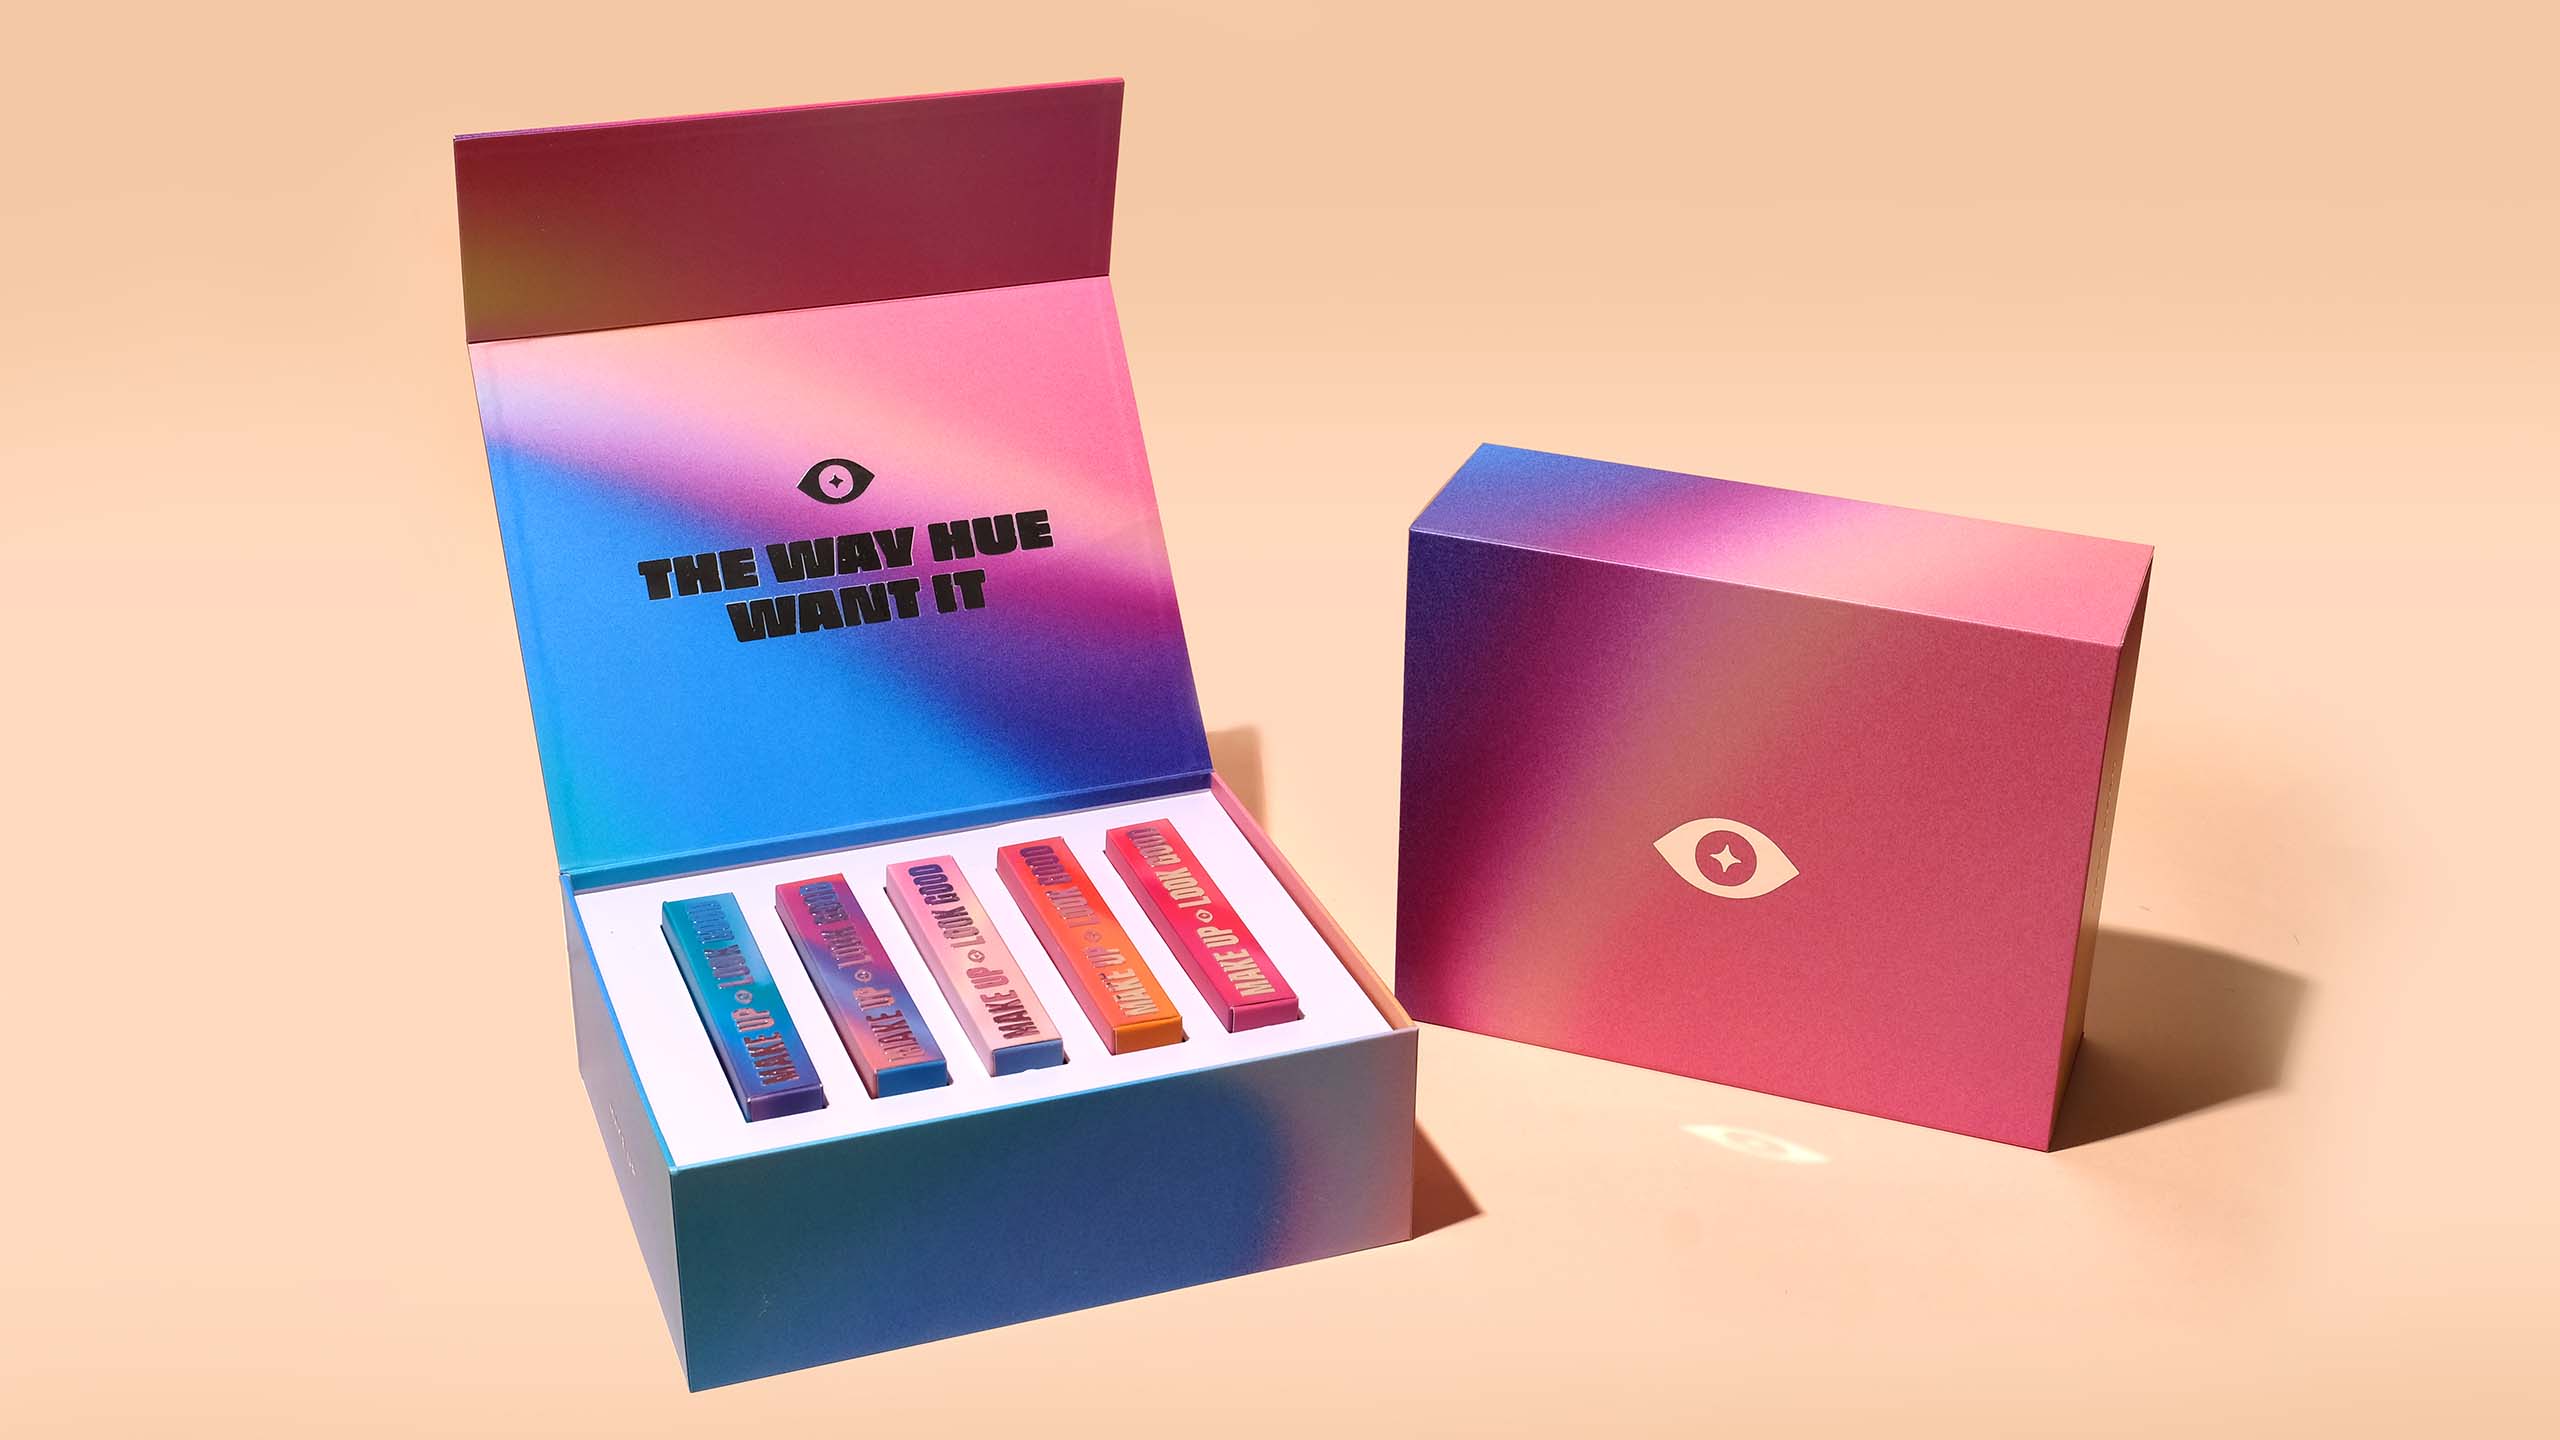 Imaginary cosmetic brand Serious Face's iconic silver and gradient packaging